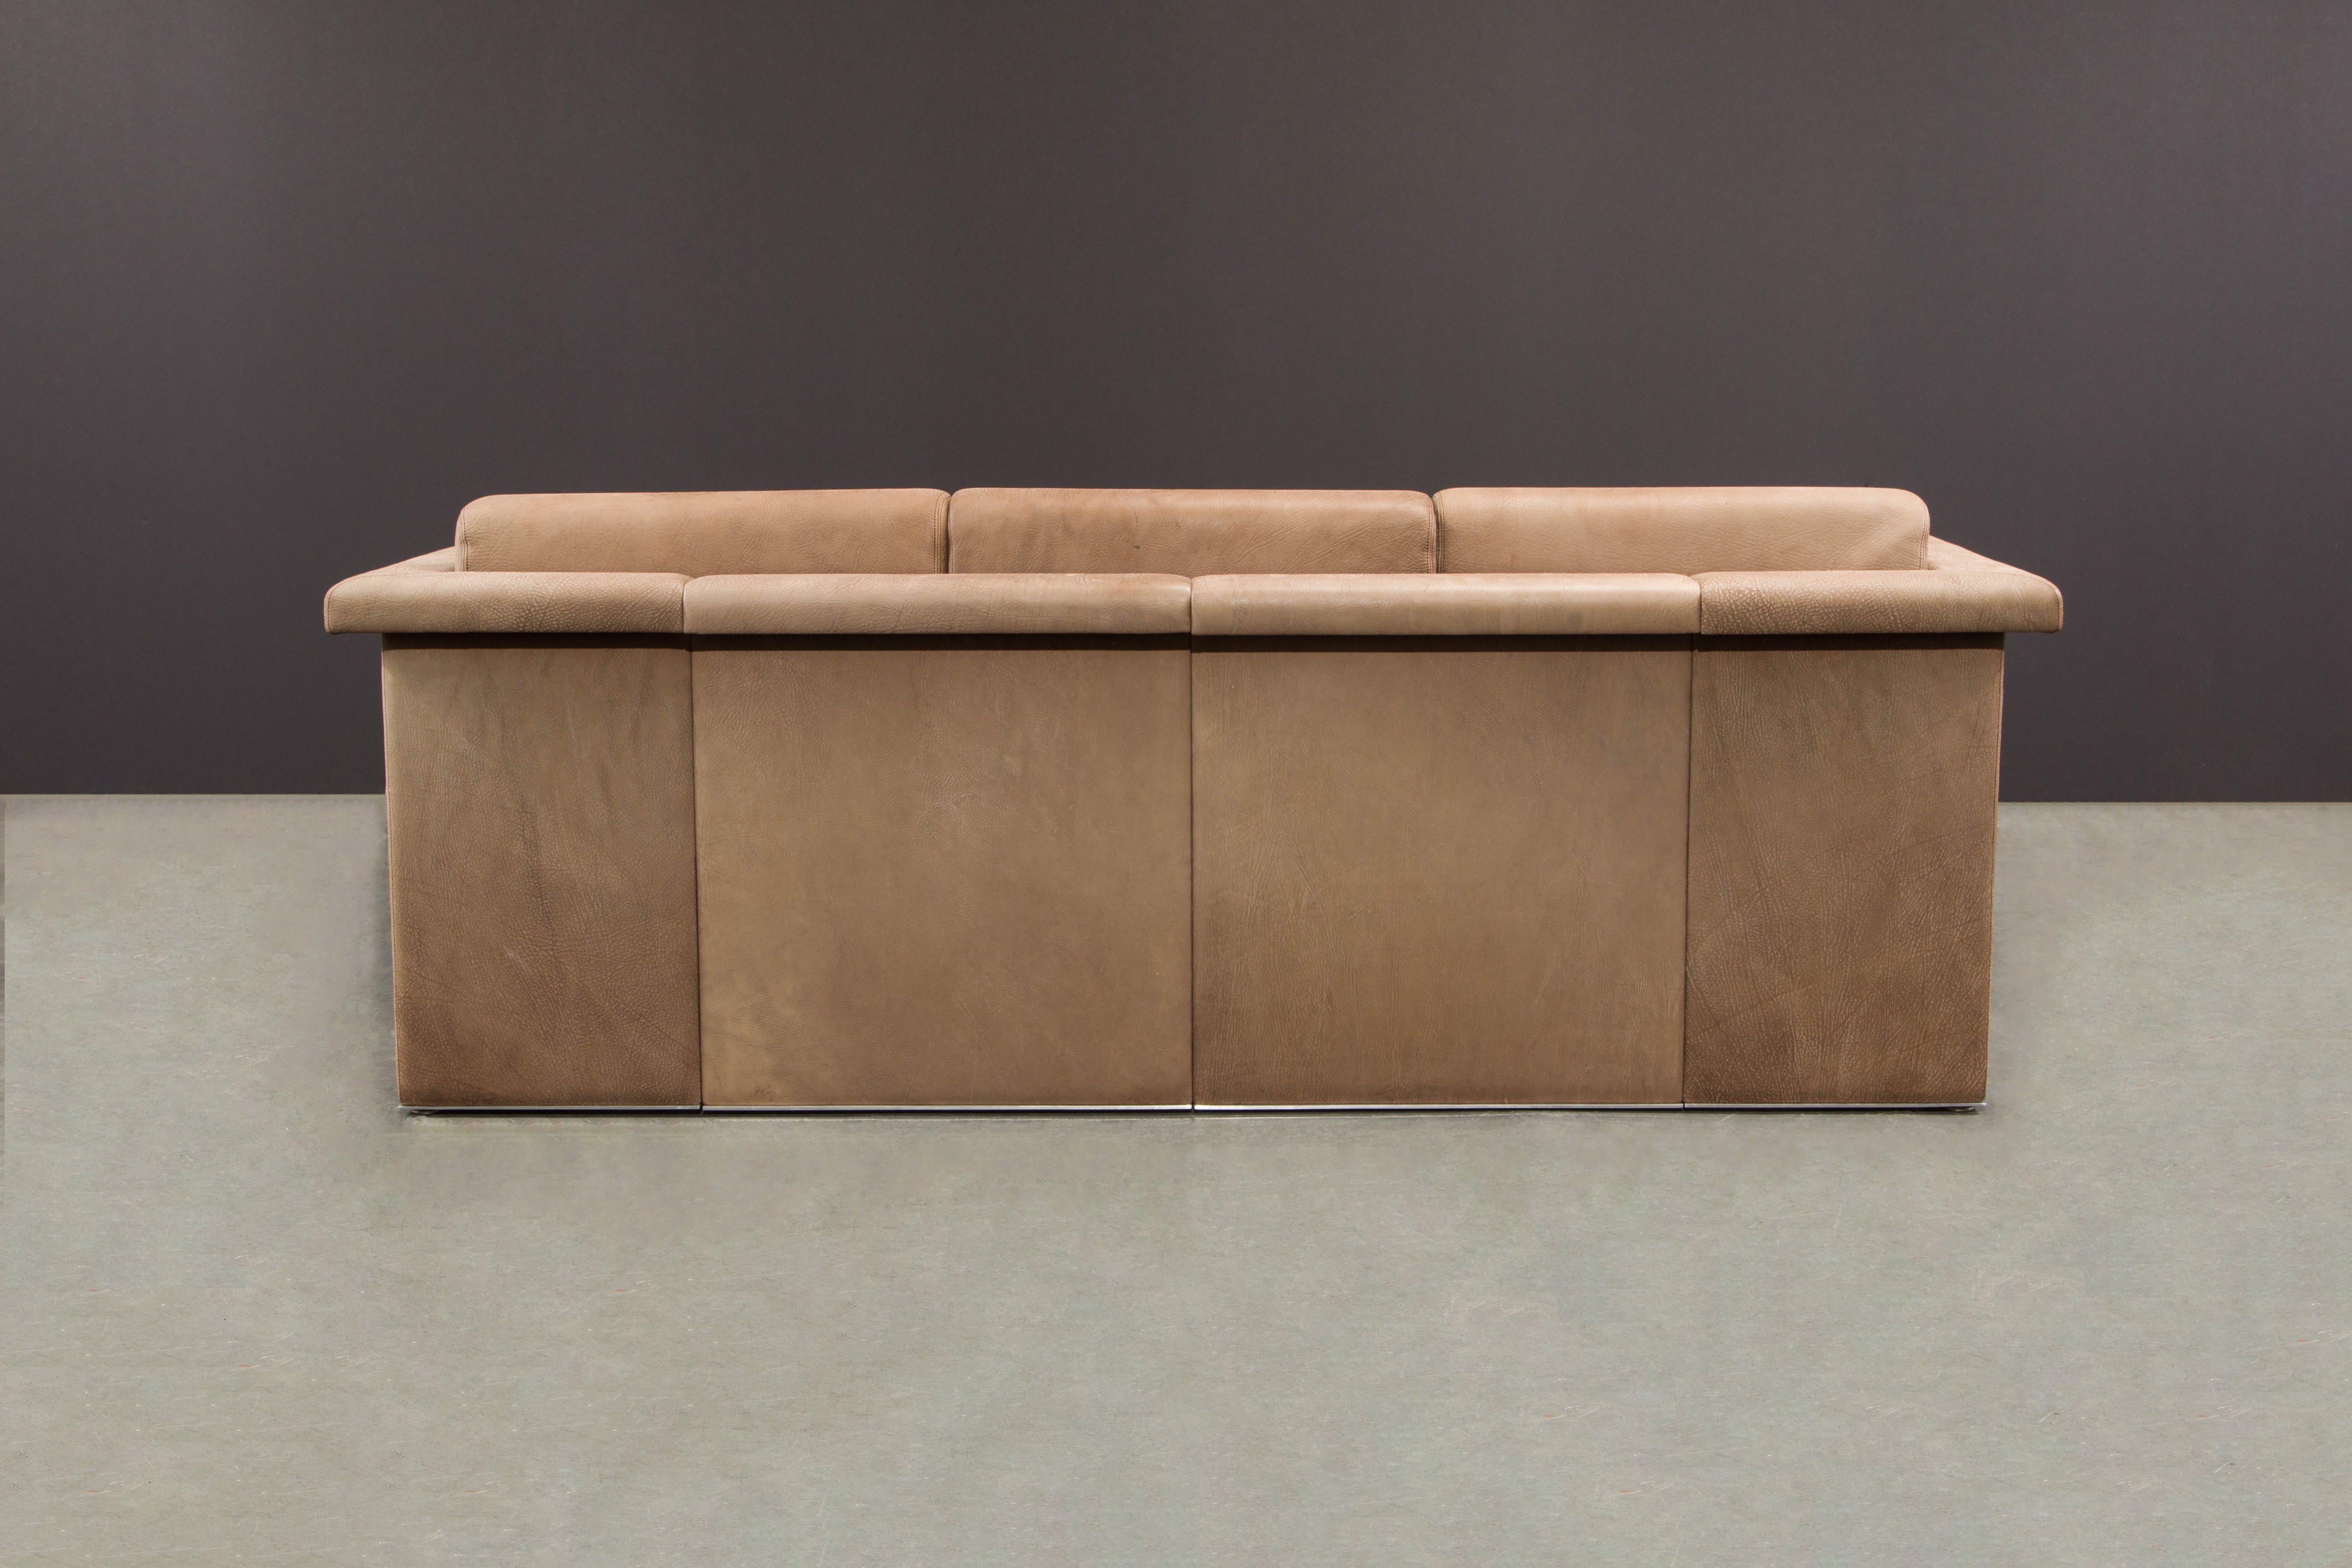 Buffalo Leather Sofa by Robert and Trix Haussmann for Knoll, c. 1988, Signed For Sale 2